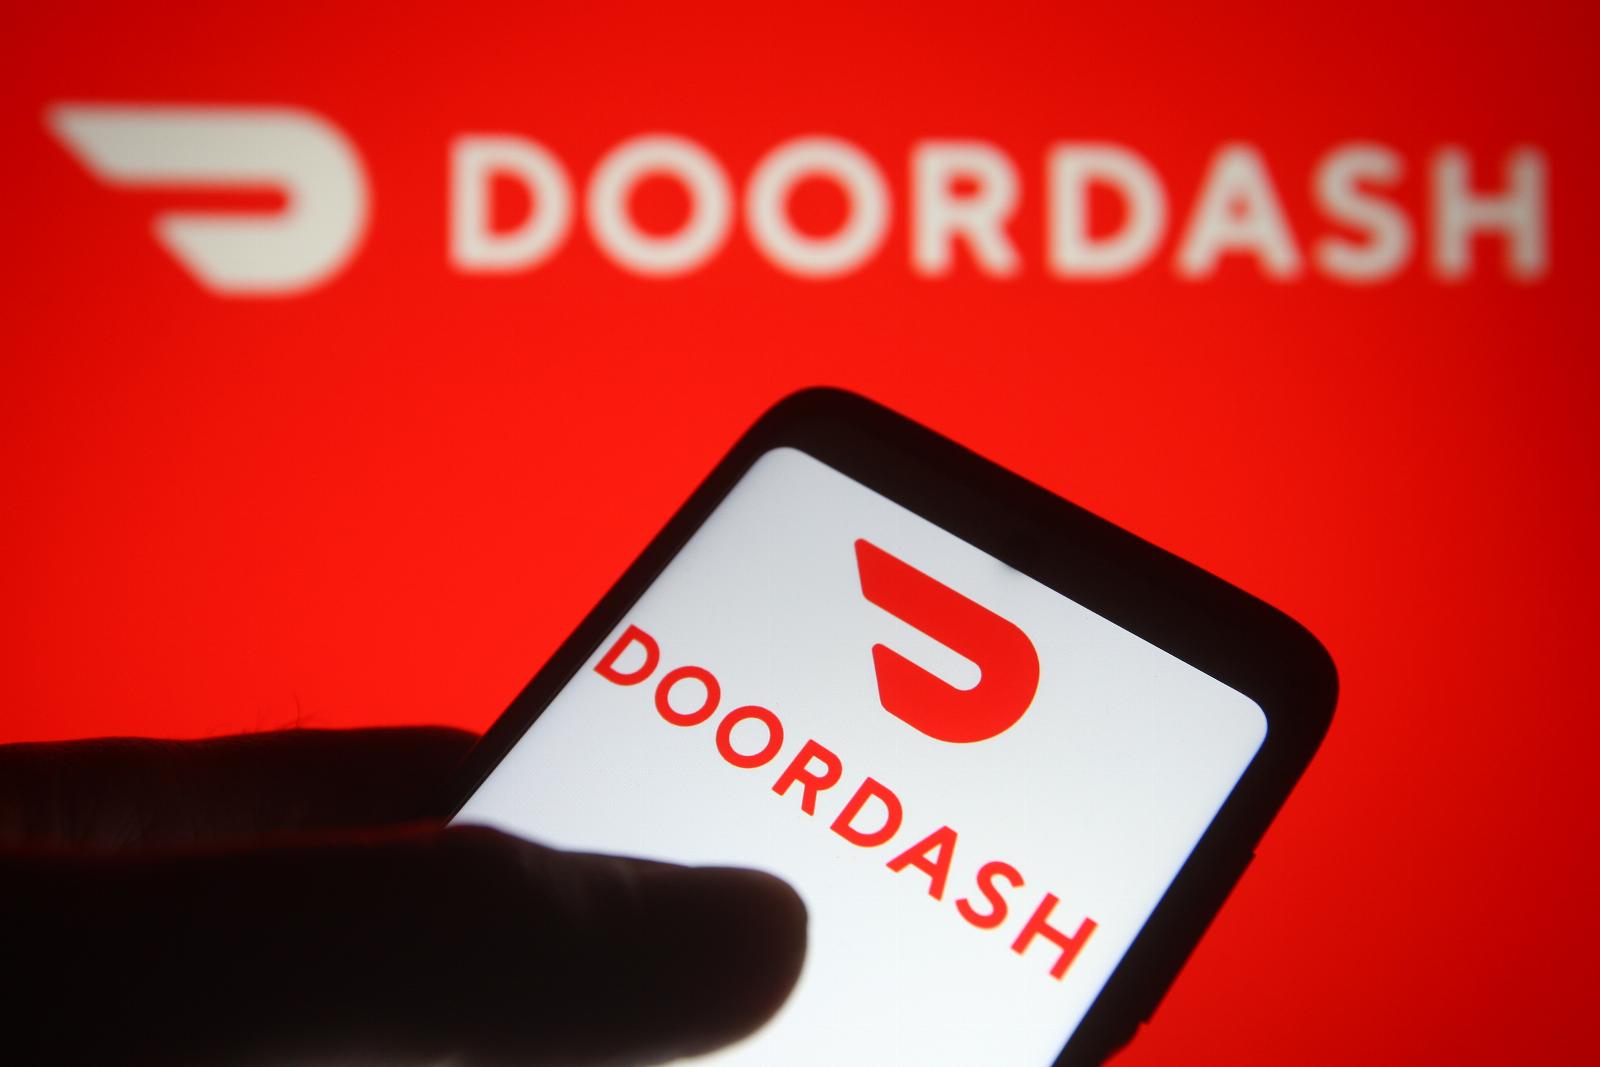 DoorDash expands retail delivery offerings with new Staples partnership